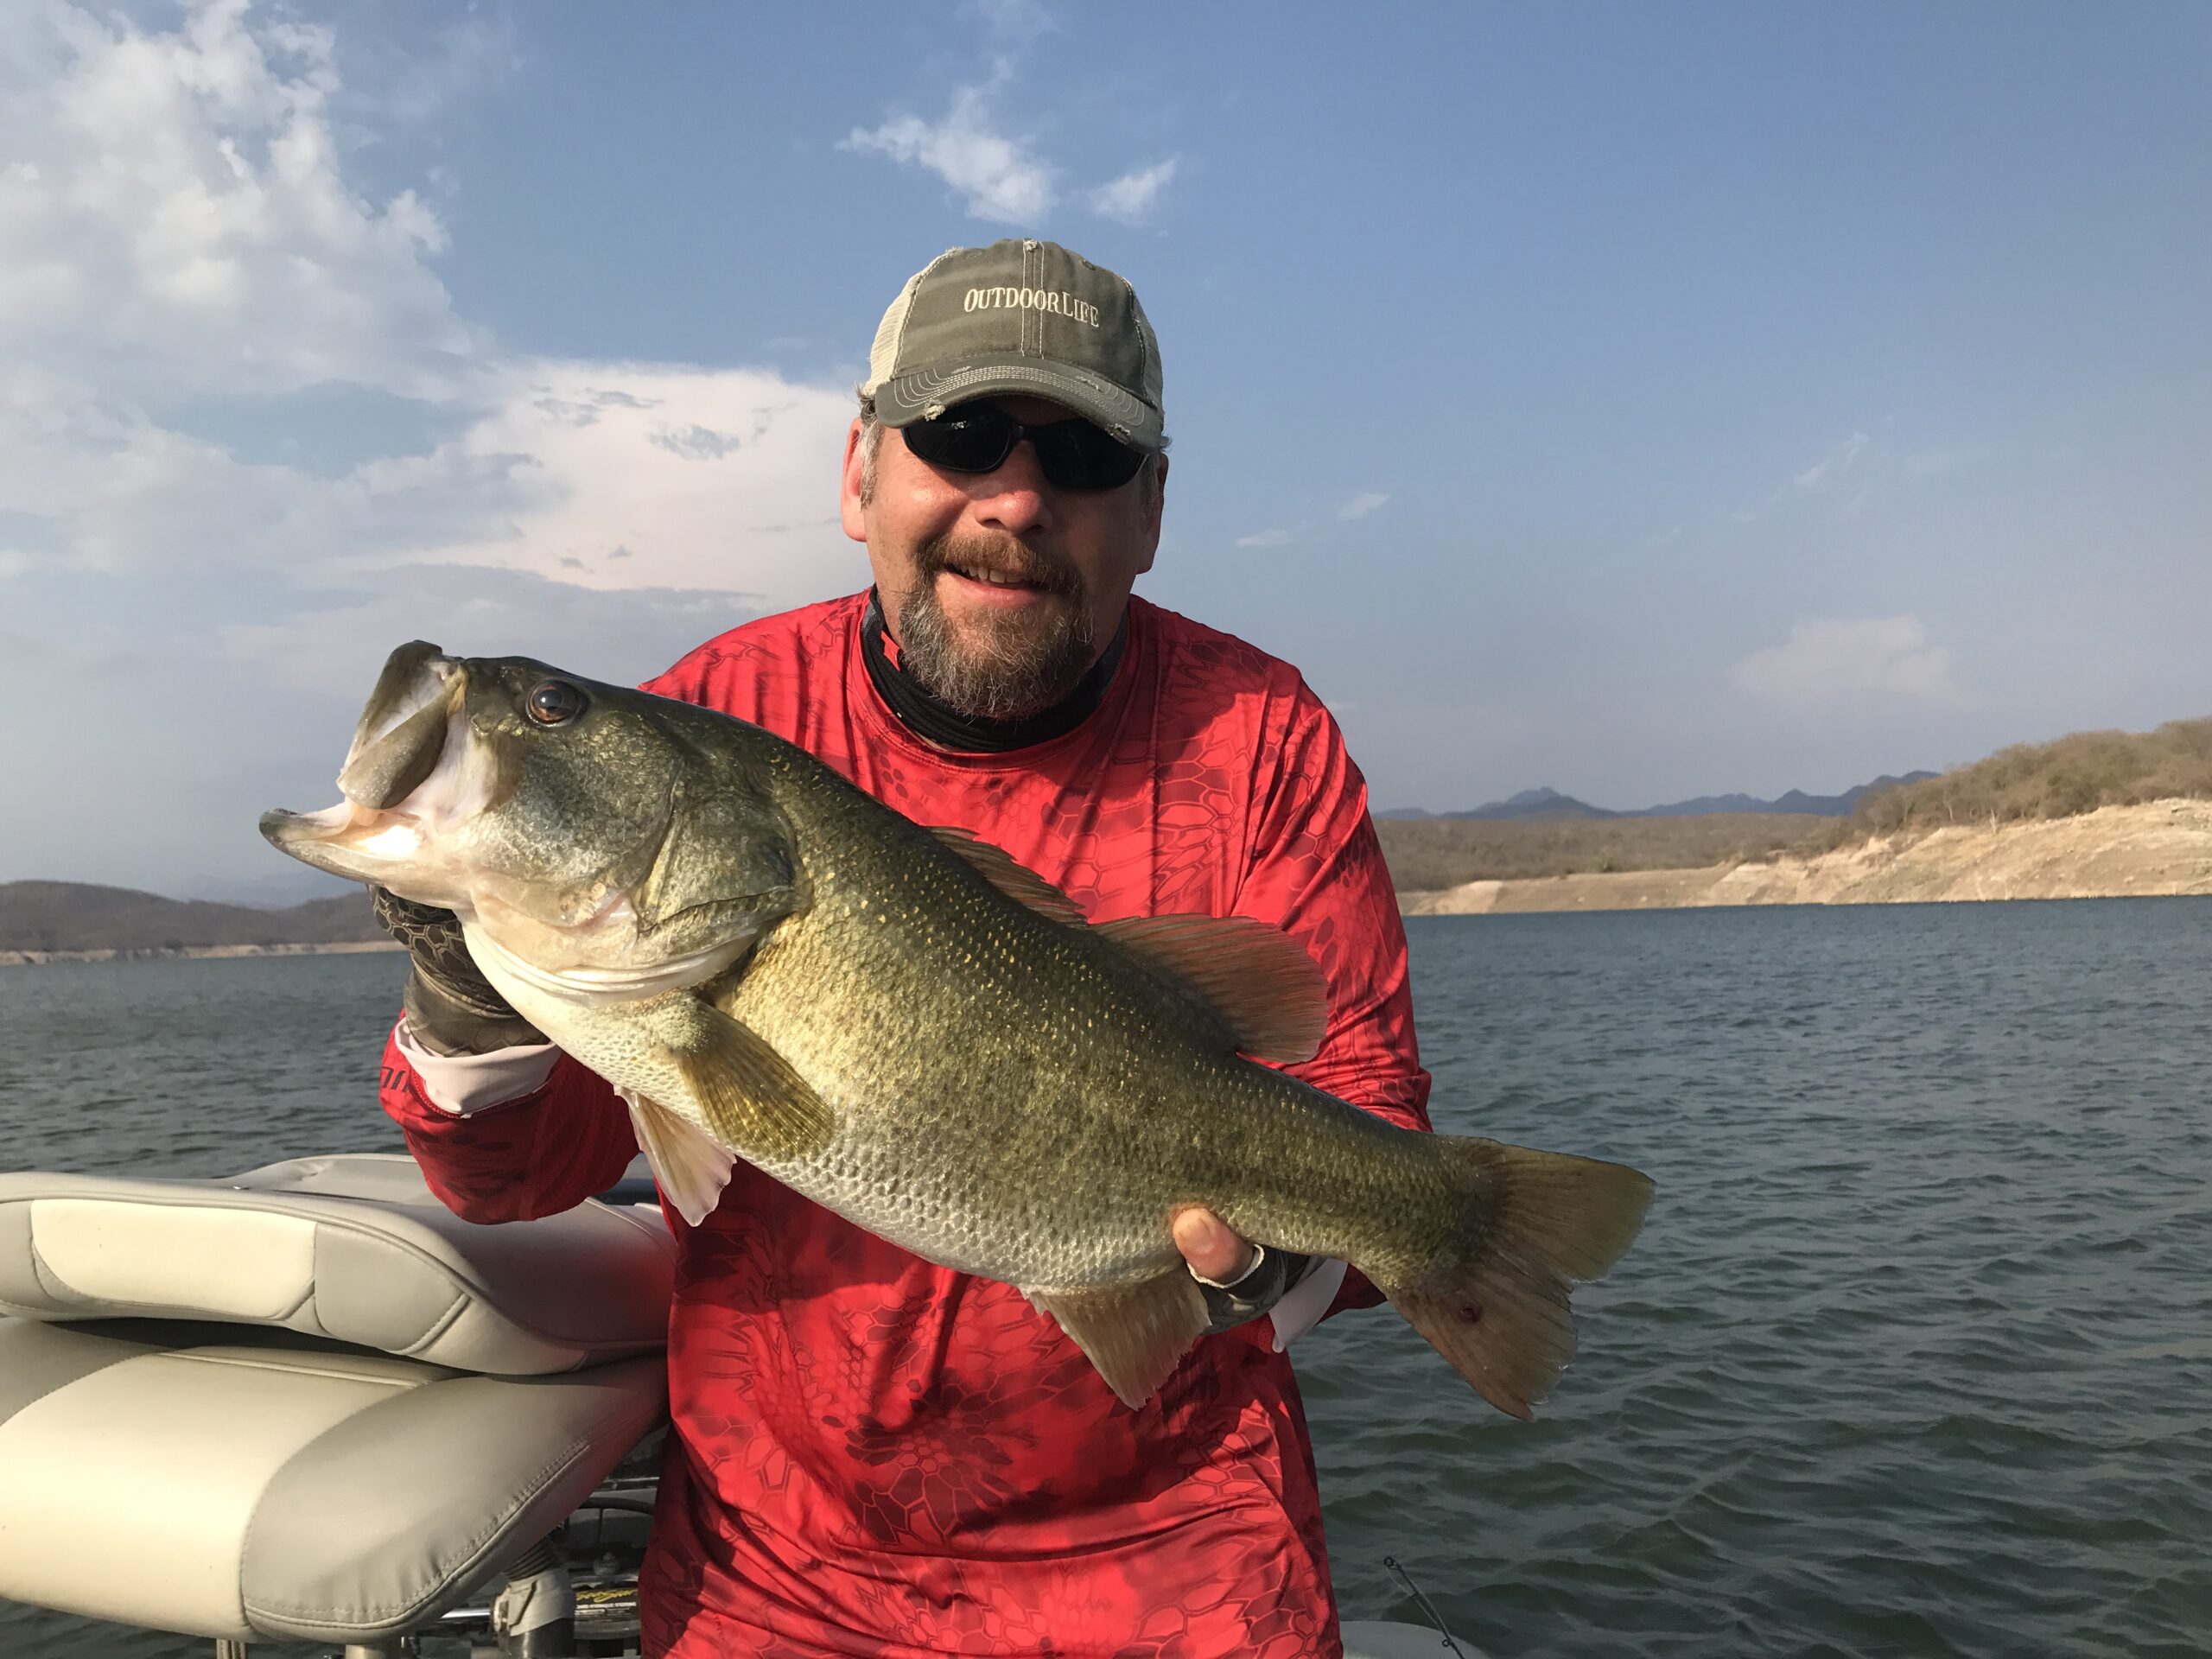 Go Big or Go Home to Hook Lunker Summer Bass - Game & Fish